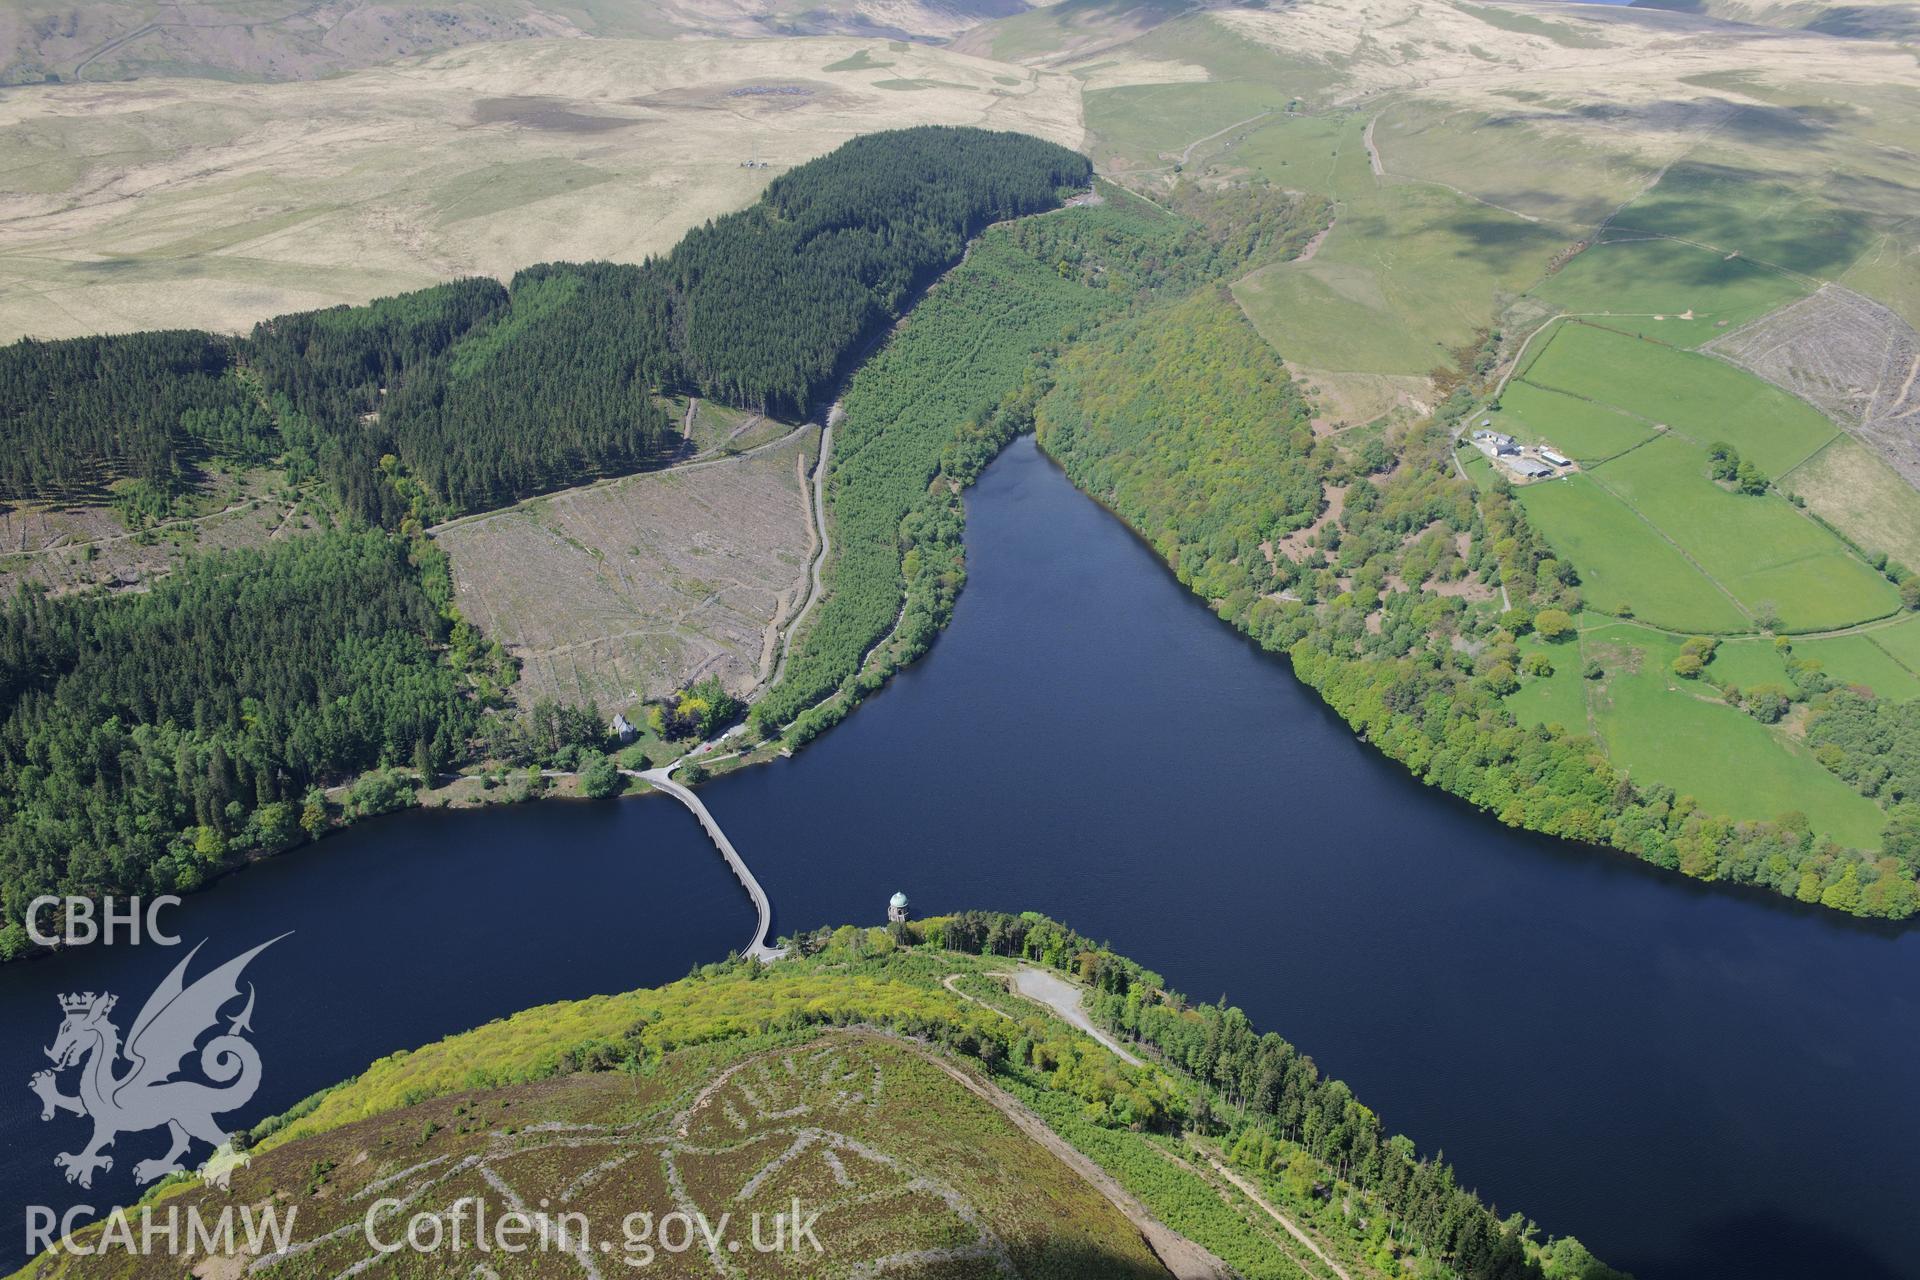 Garreg-Ddu dam, reservoir and valve tower, Caban Coch reservoir and Nantgwyllt Church at Elan Valley. Oblique aerial photograph taken during the Royal Commission's programme of archaeological aerial reconnaissance by Toby Driver on 3rd June 2015.